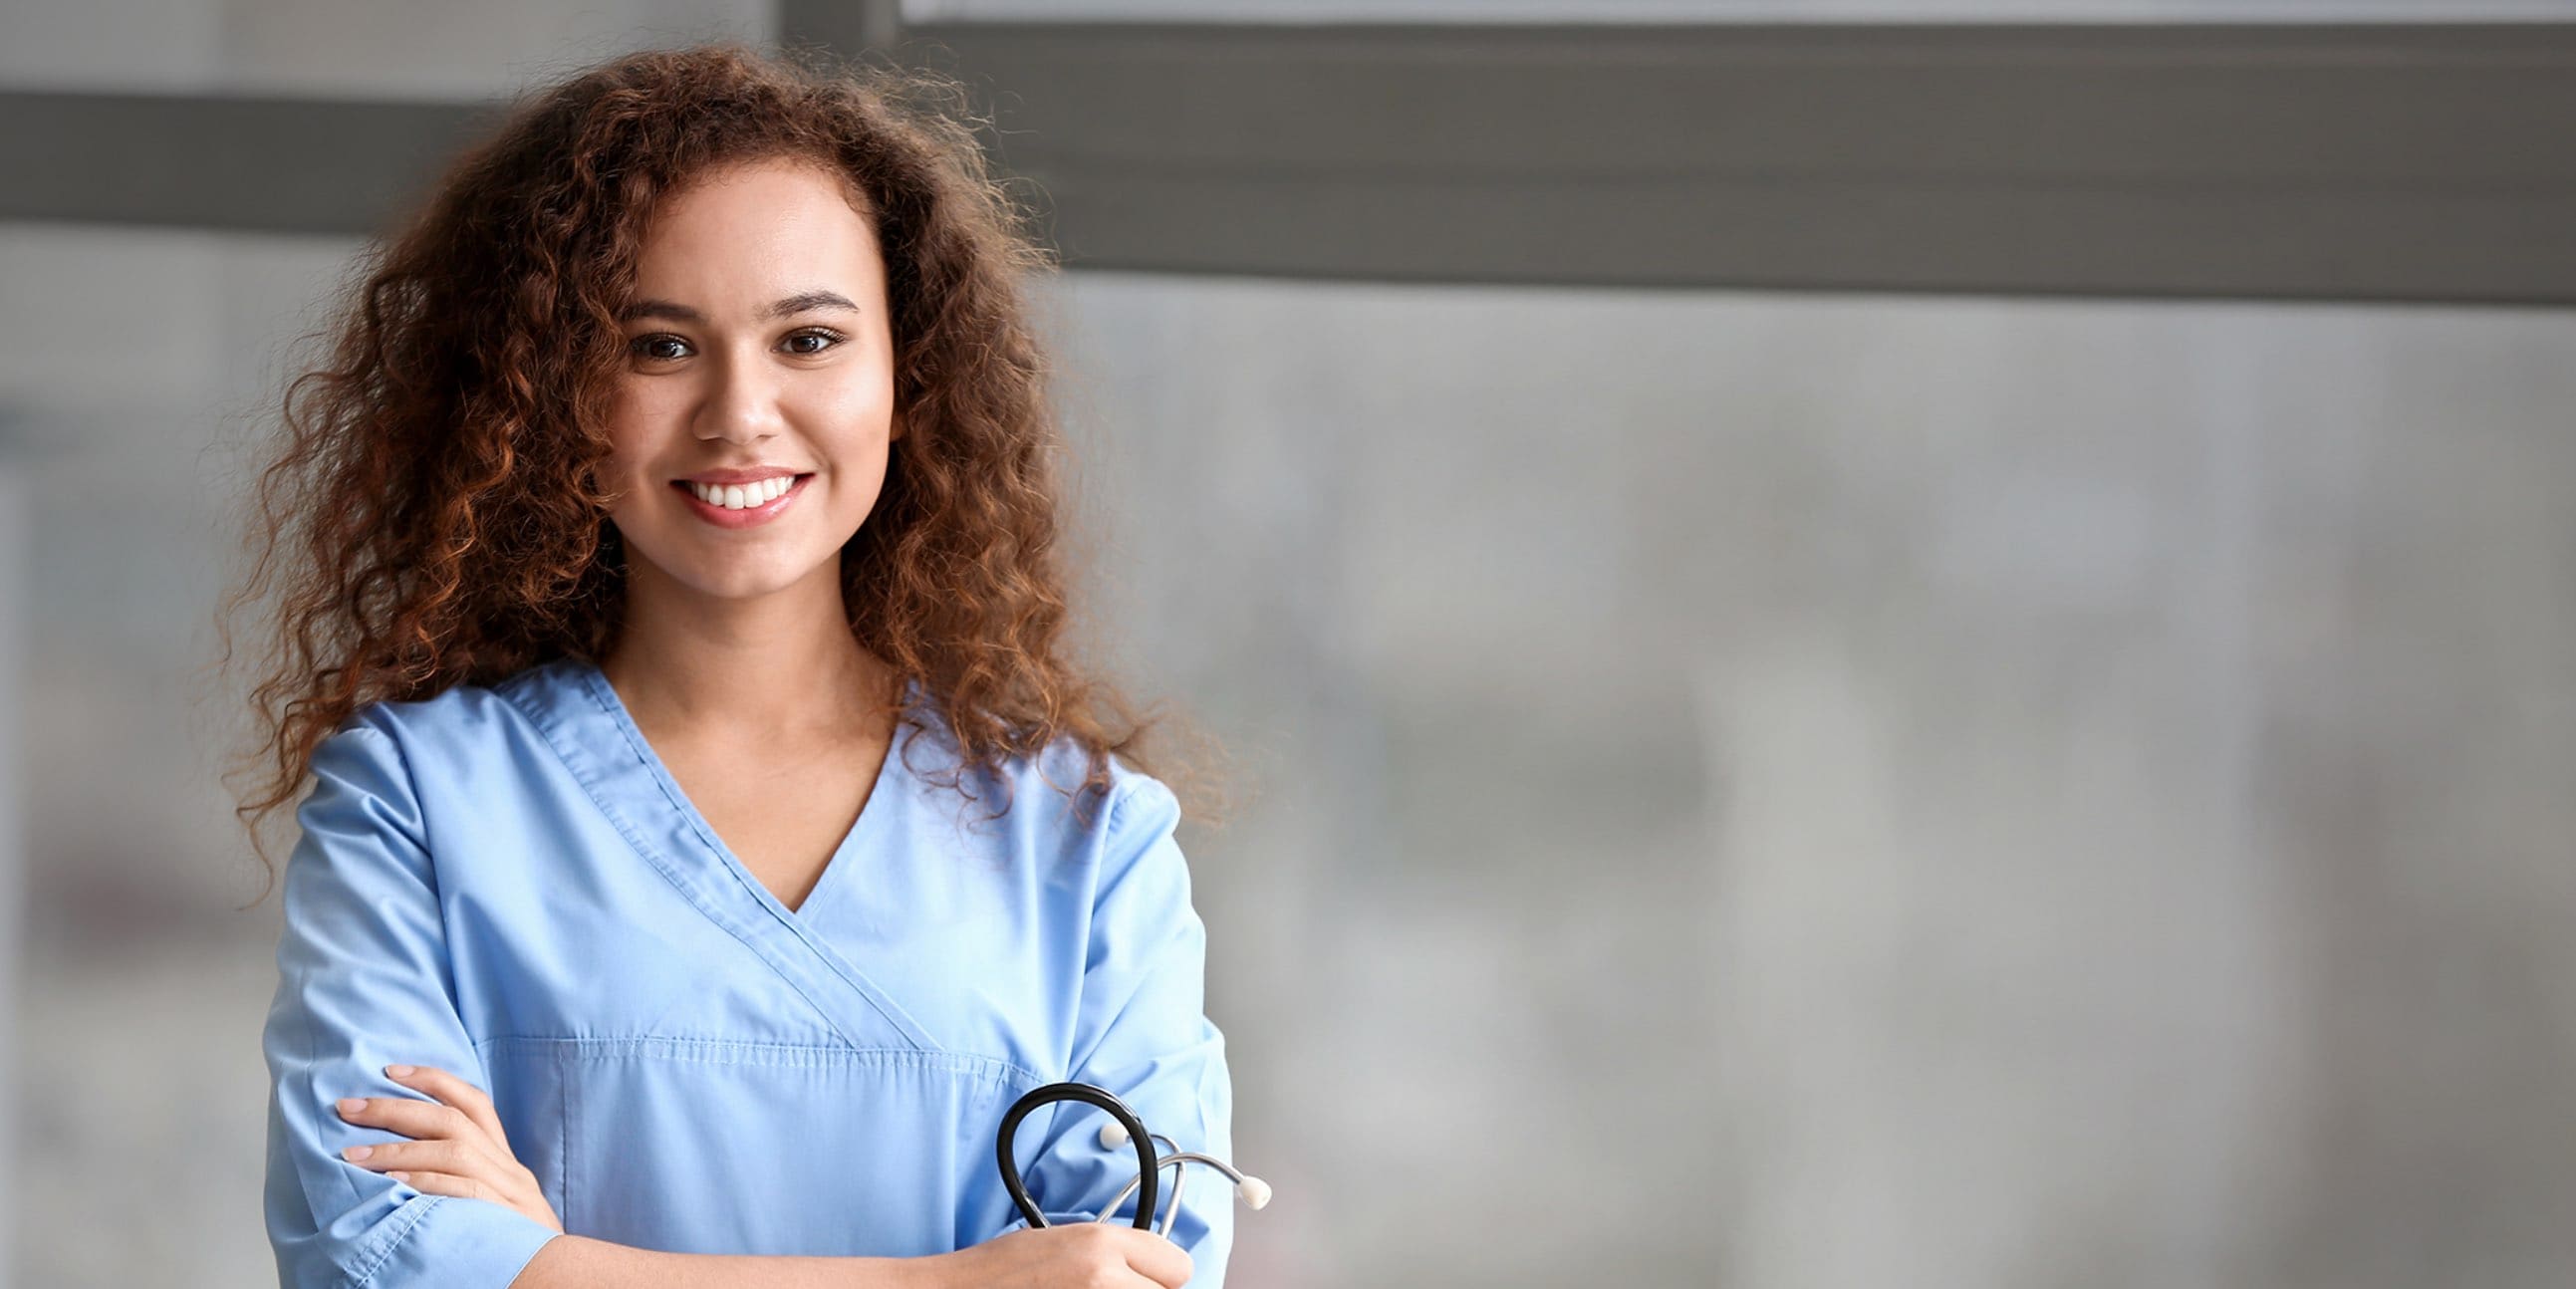 The Art of Communication: Taking Patient Histories as a Medical Assistant